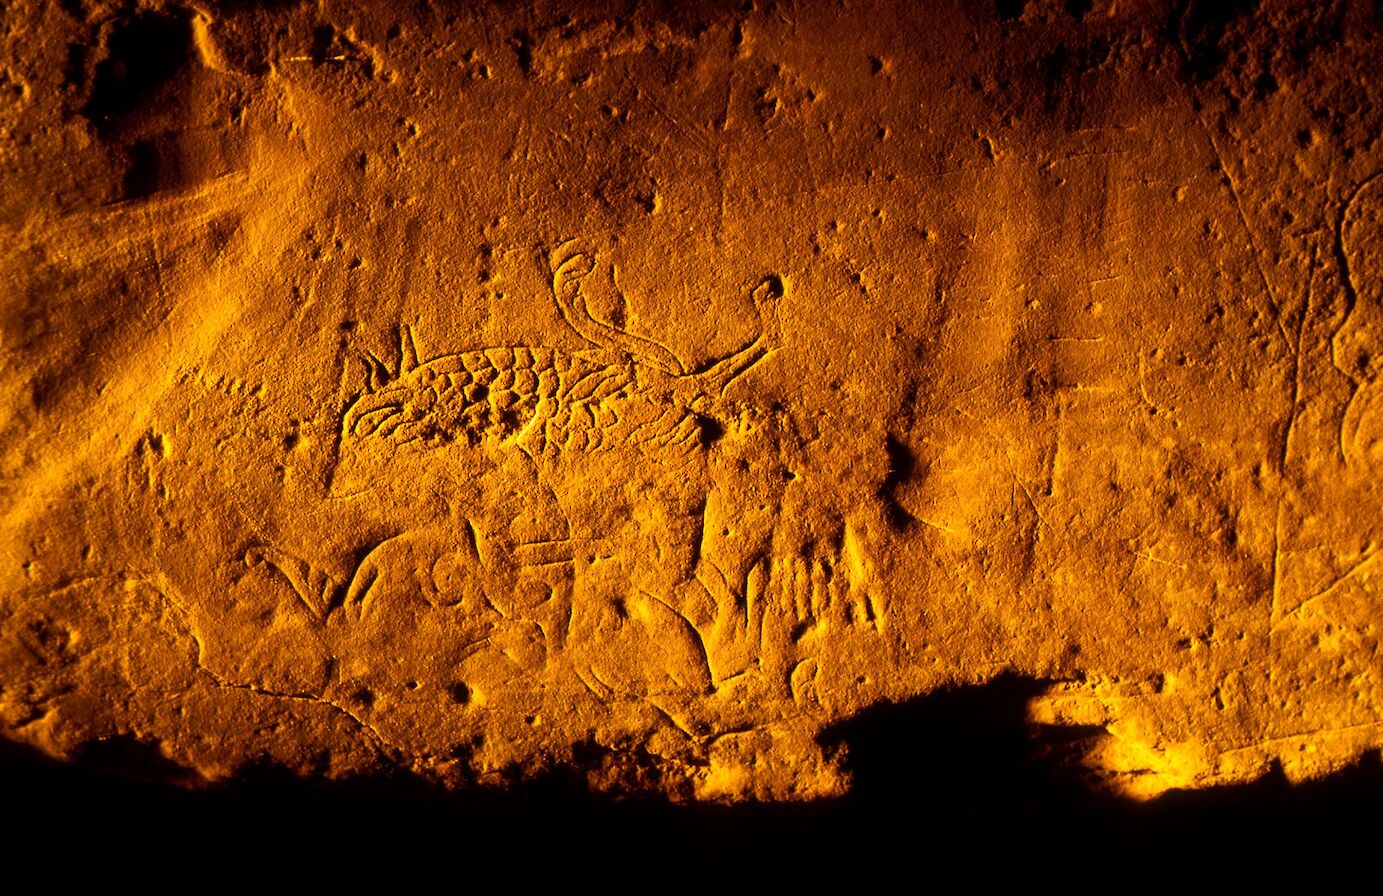 The Maeshowe Dragon carving - image by Paul Tomkins/VisitScotland